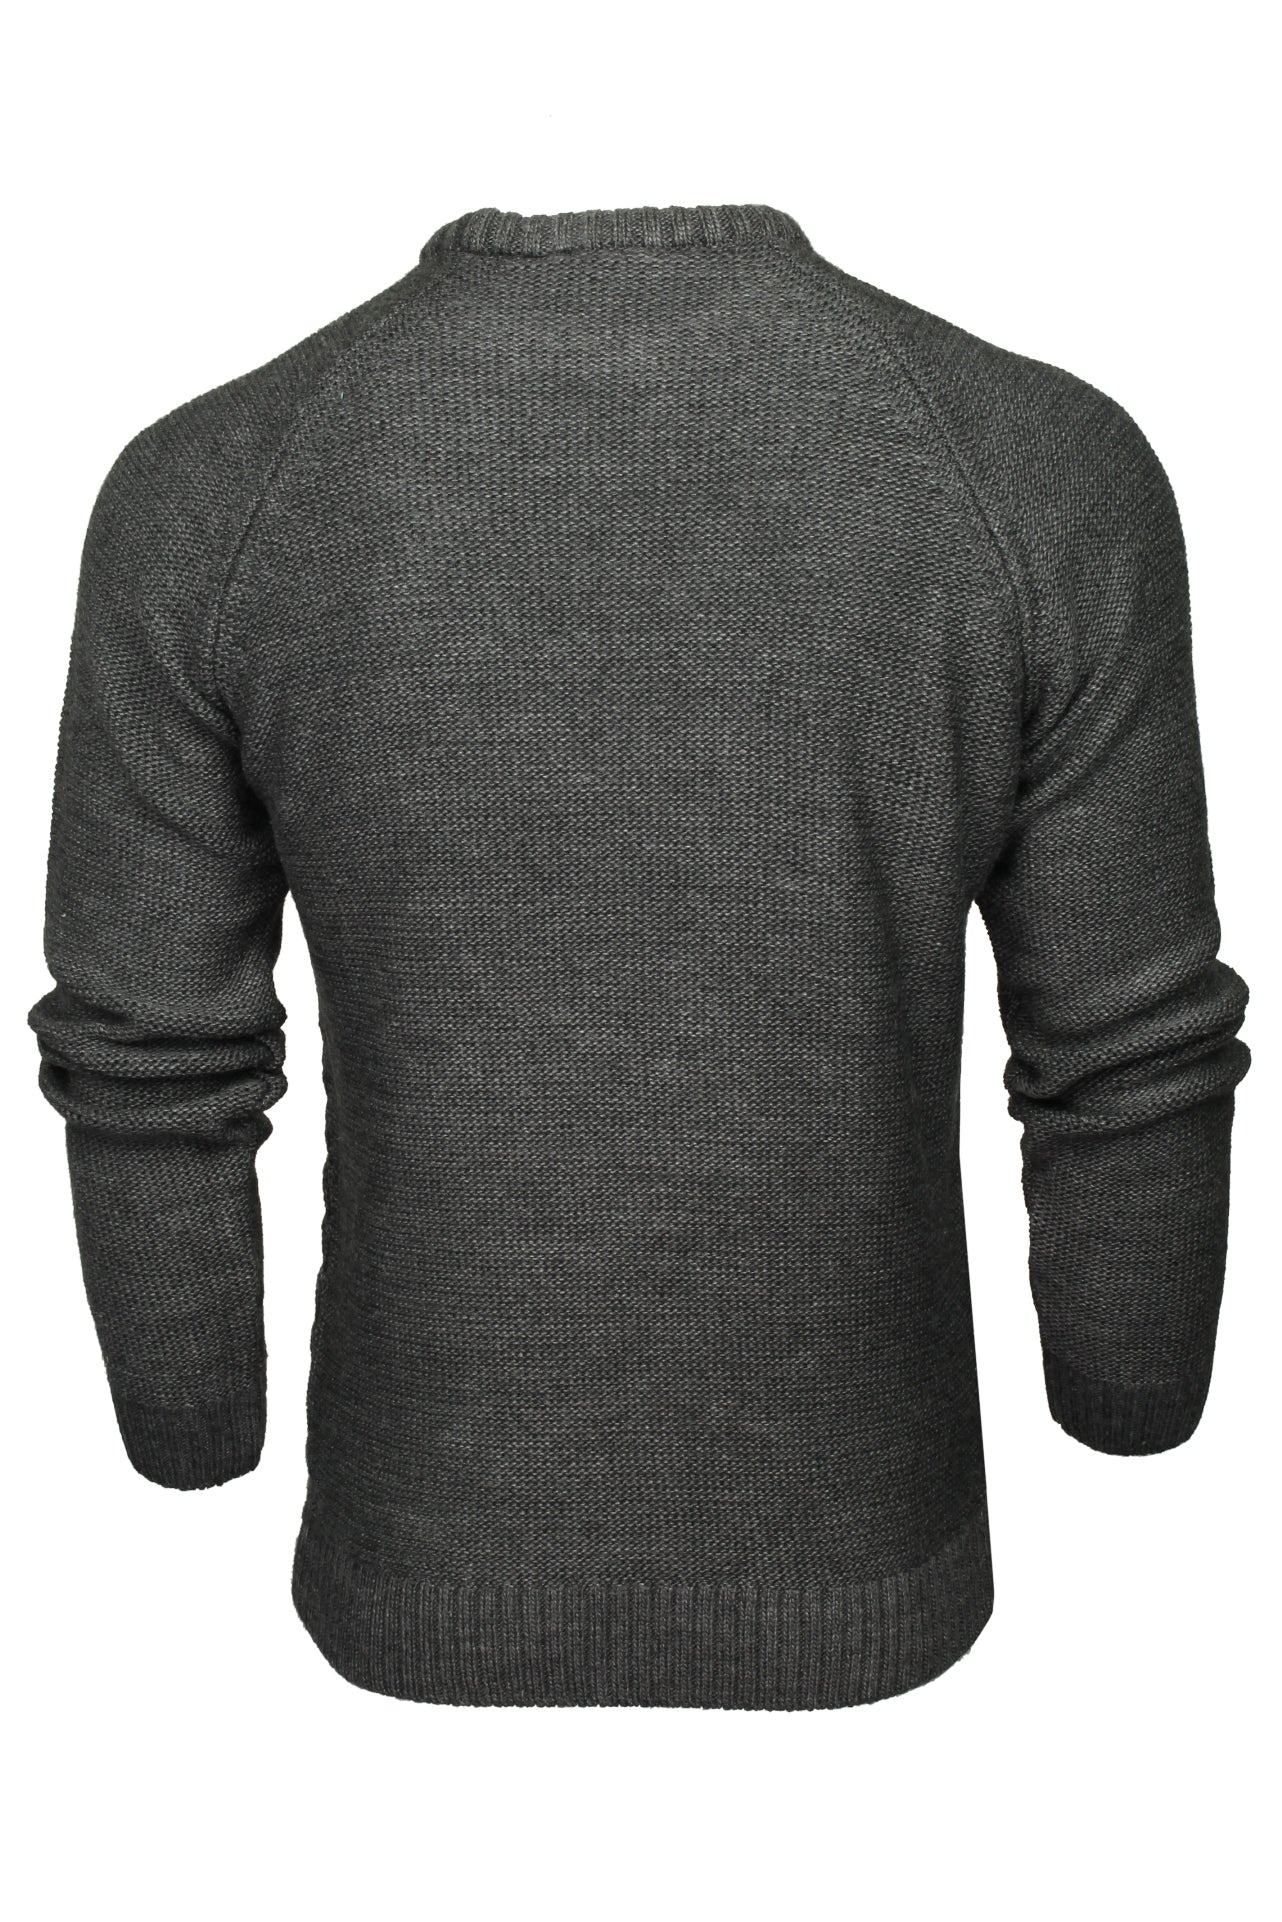 Xact Mens Raglan Jumper With Textured Knit Front-3